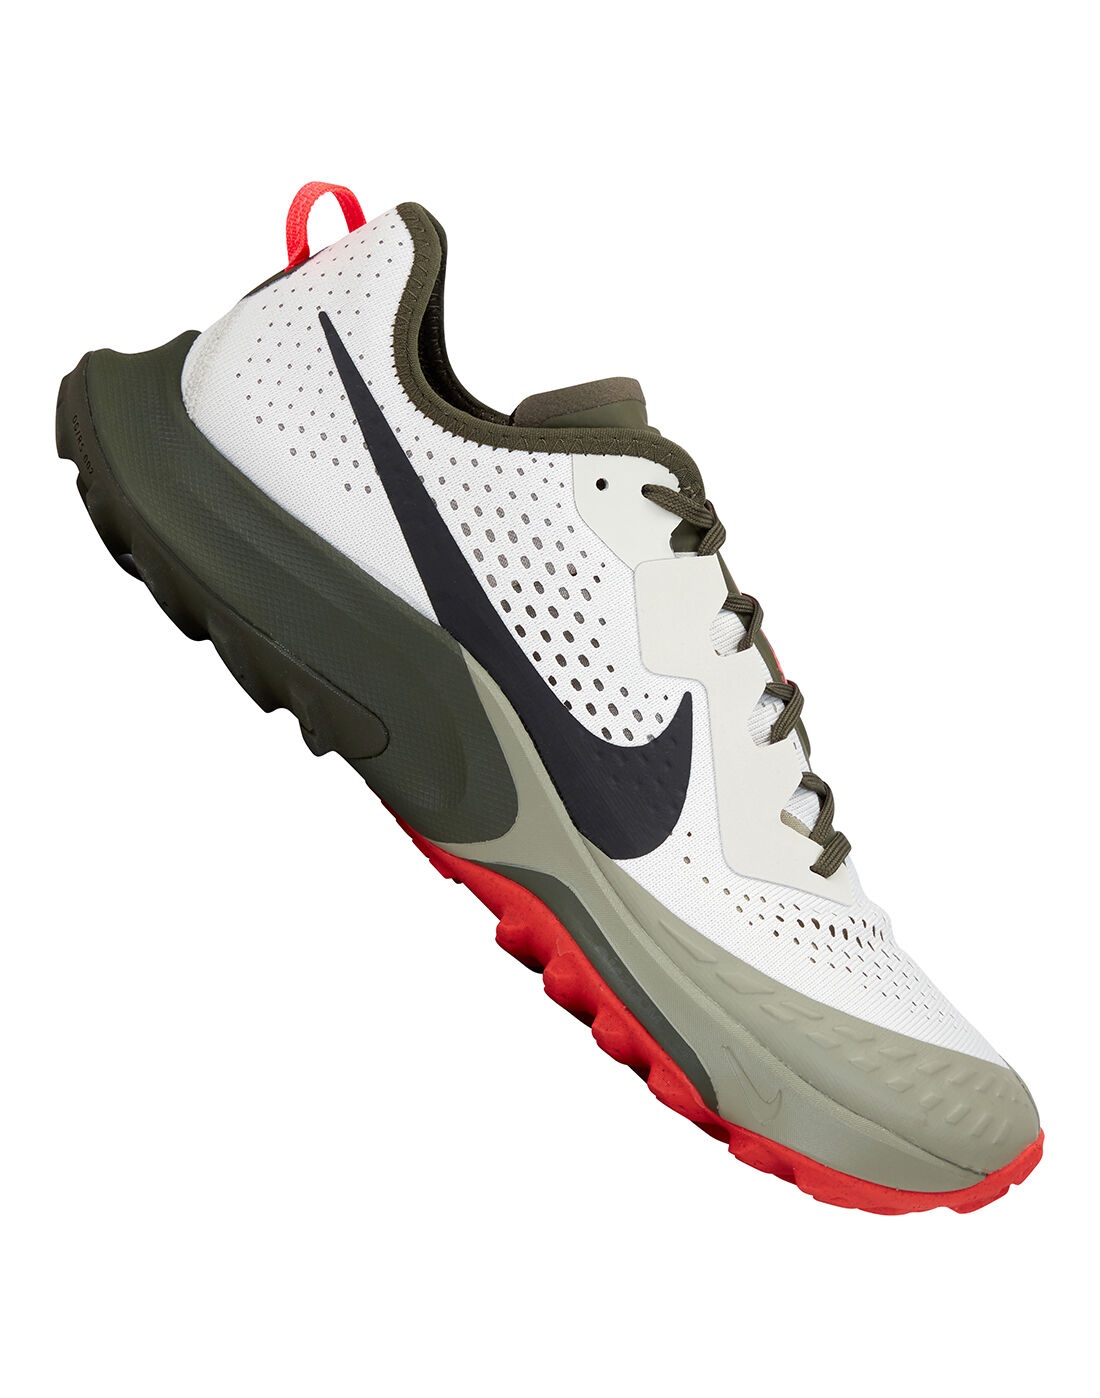 nike shoes air max 2016 price in india